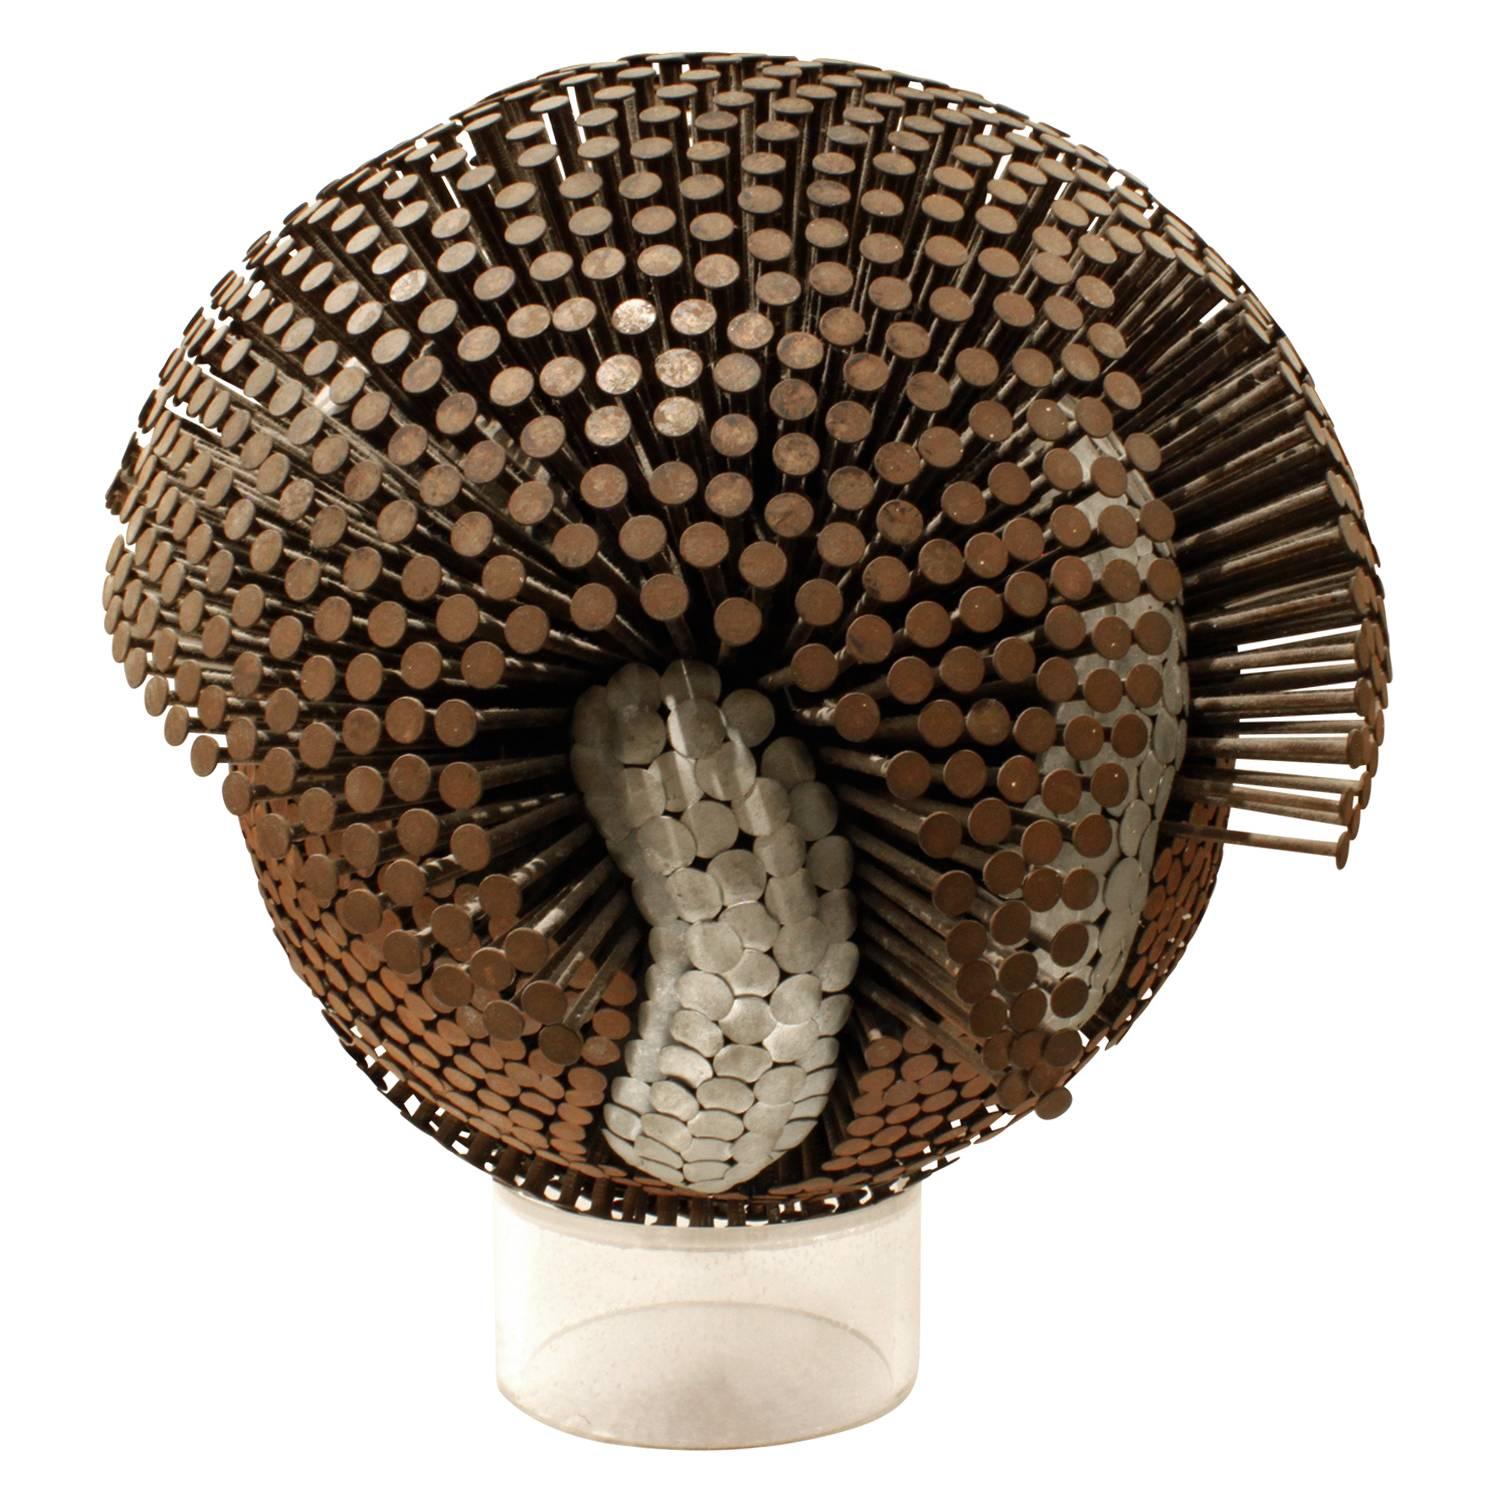 Sculpture composed of rusted and steel nails, spherical on a Lucite base, sold by Karl Springer, American, circa 1975. Comes with Authentication by Karl Springer's Director of Design. This sculpture is amazing.